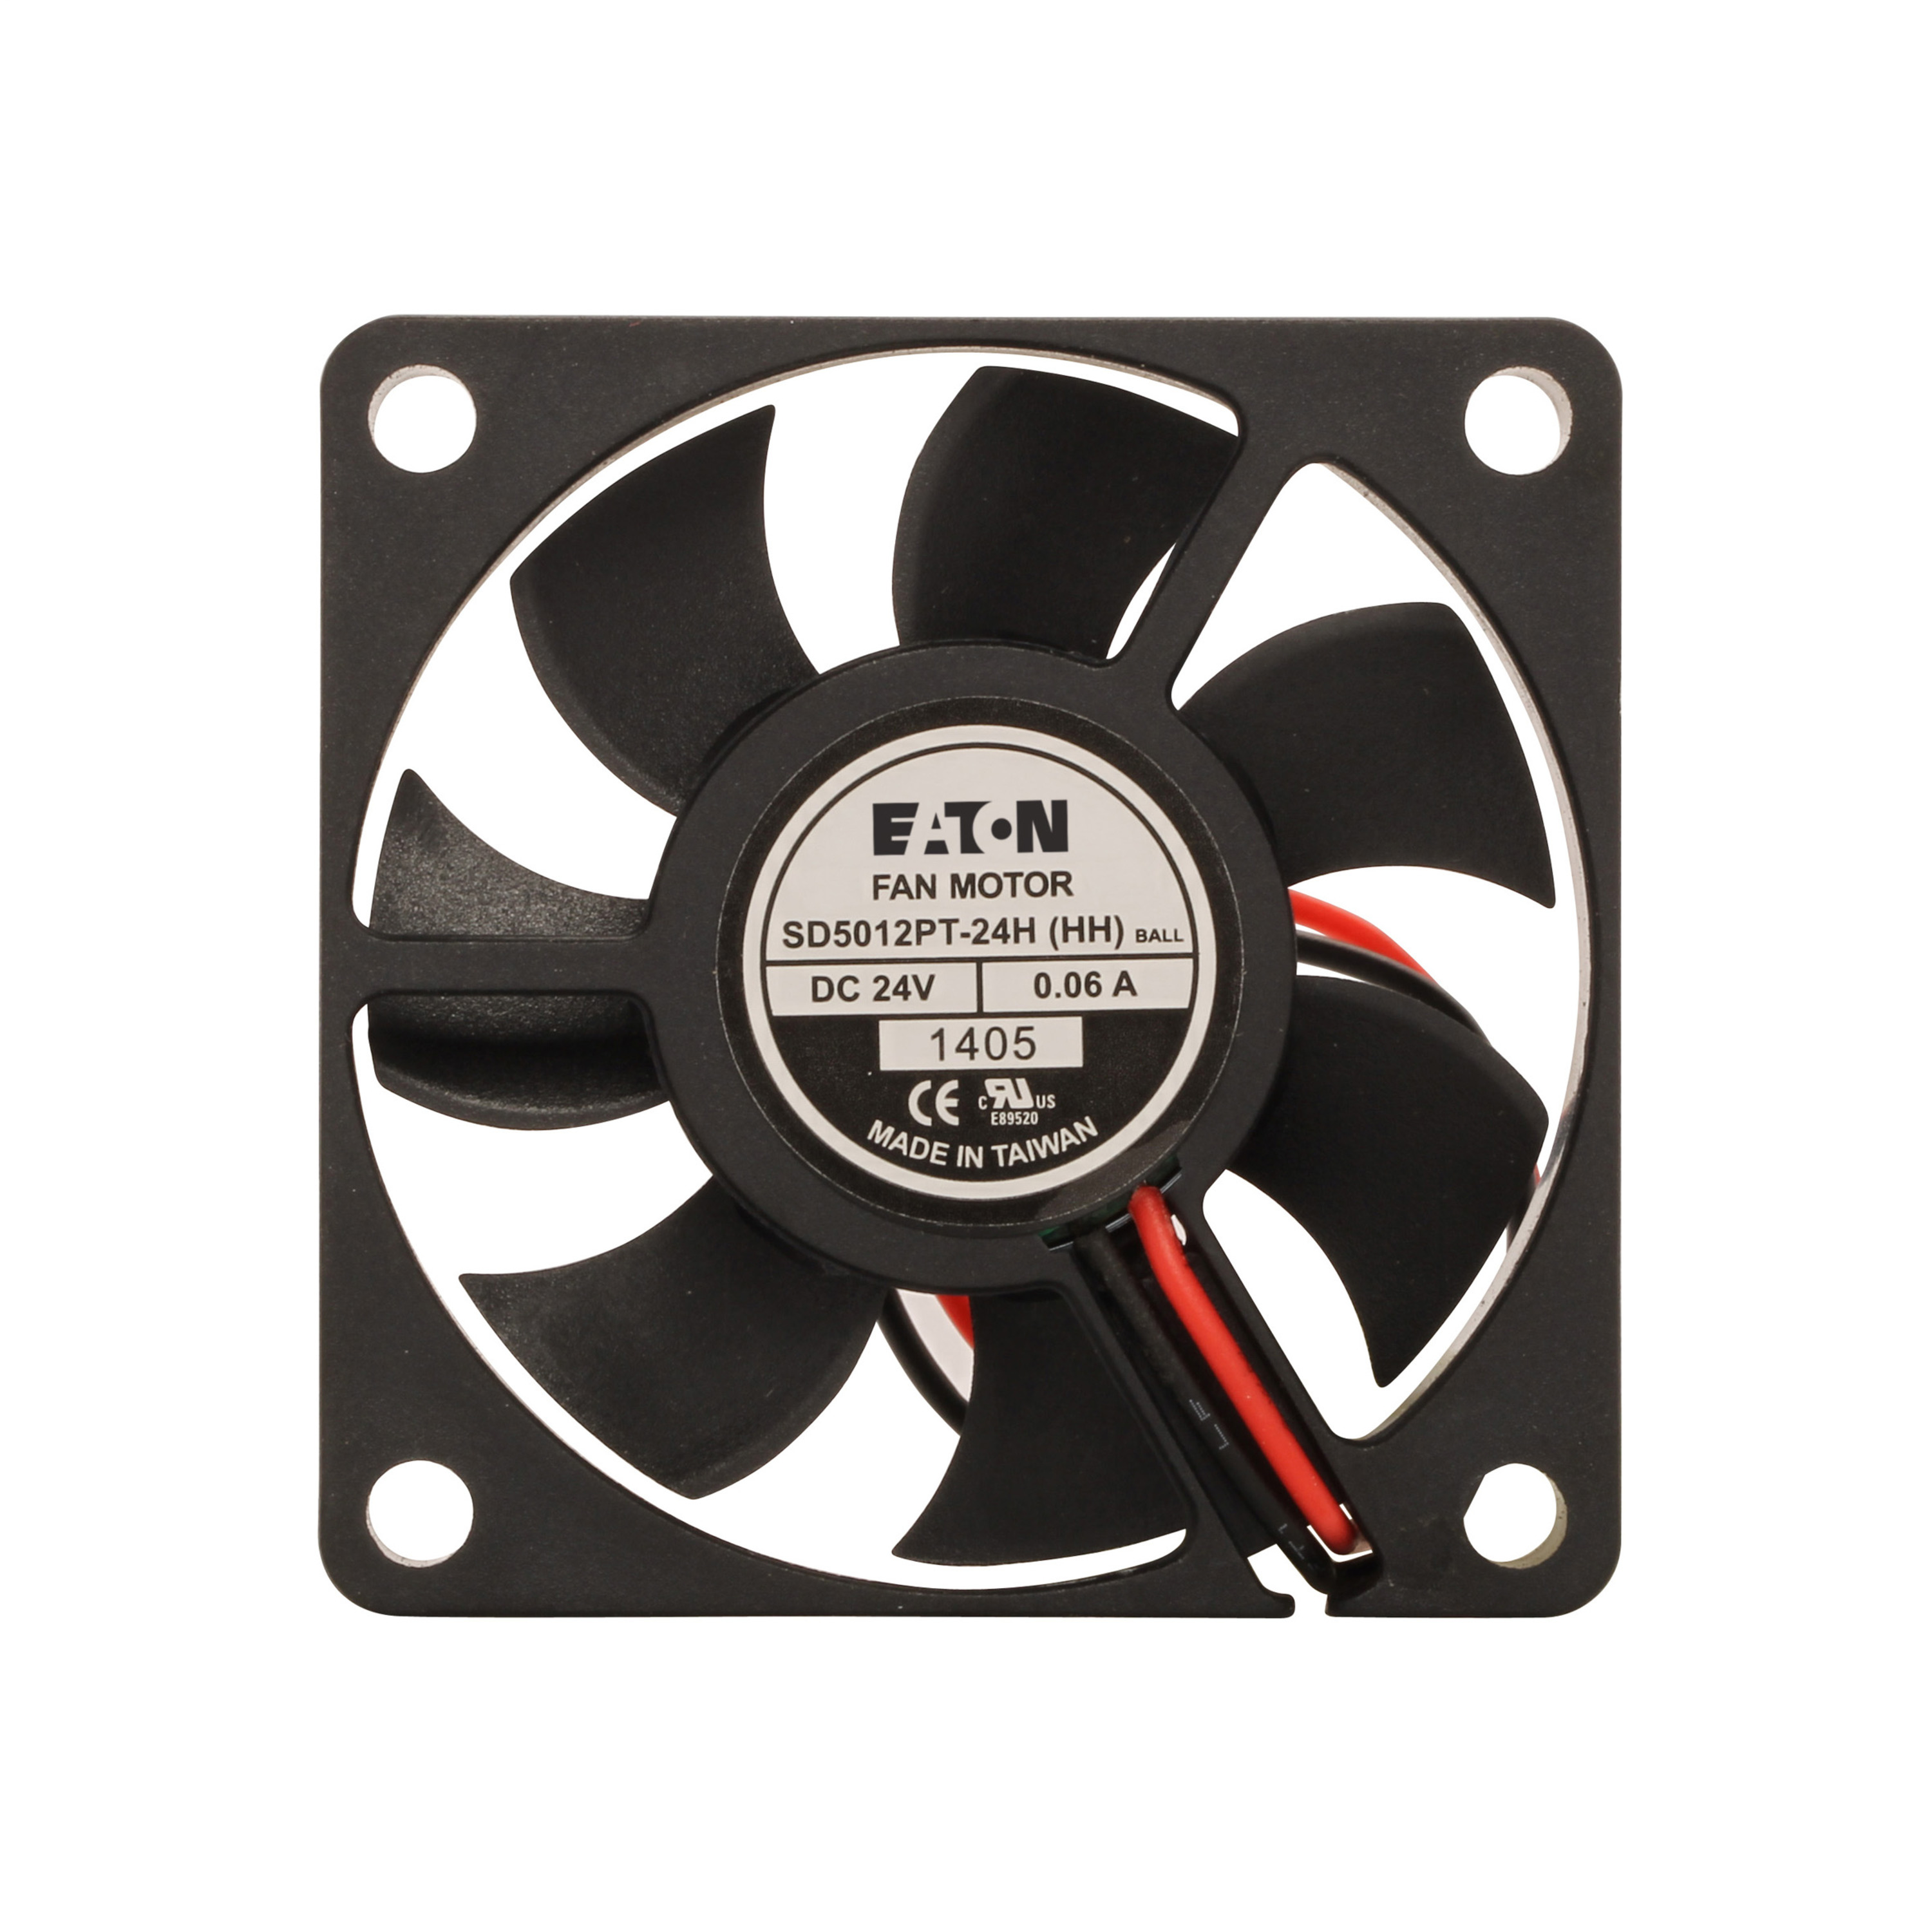 Eaton PP09041 Eaton | Cutler Hammer PP09041  Variable Frequency Drives VFD – Cooling Exhaust Fan https://gesrepair.com/wp-content/uploads/2022/Eaton/Images/Eaton_PP09041_Variable_Frequency_Drive.jpg